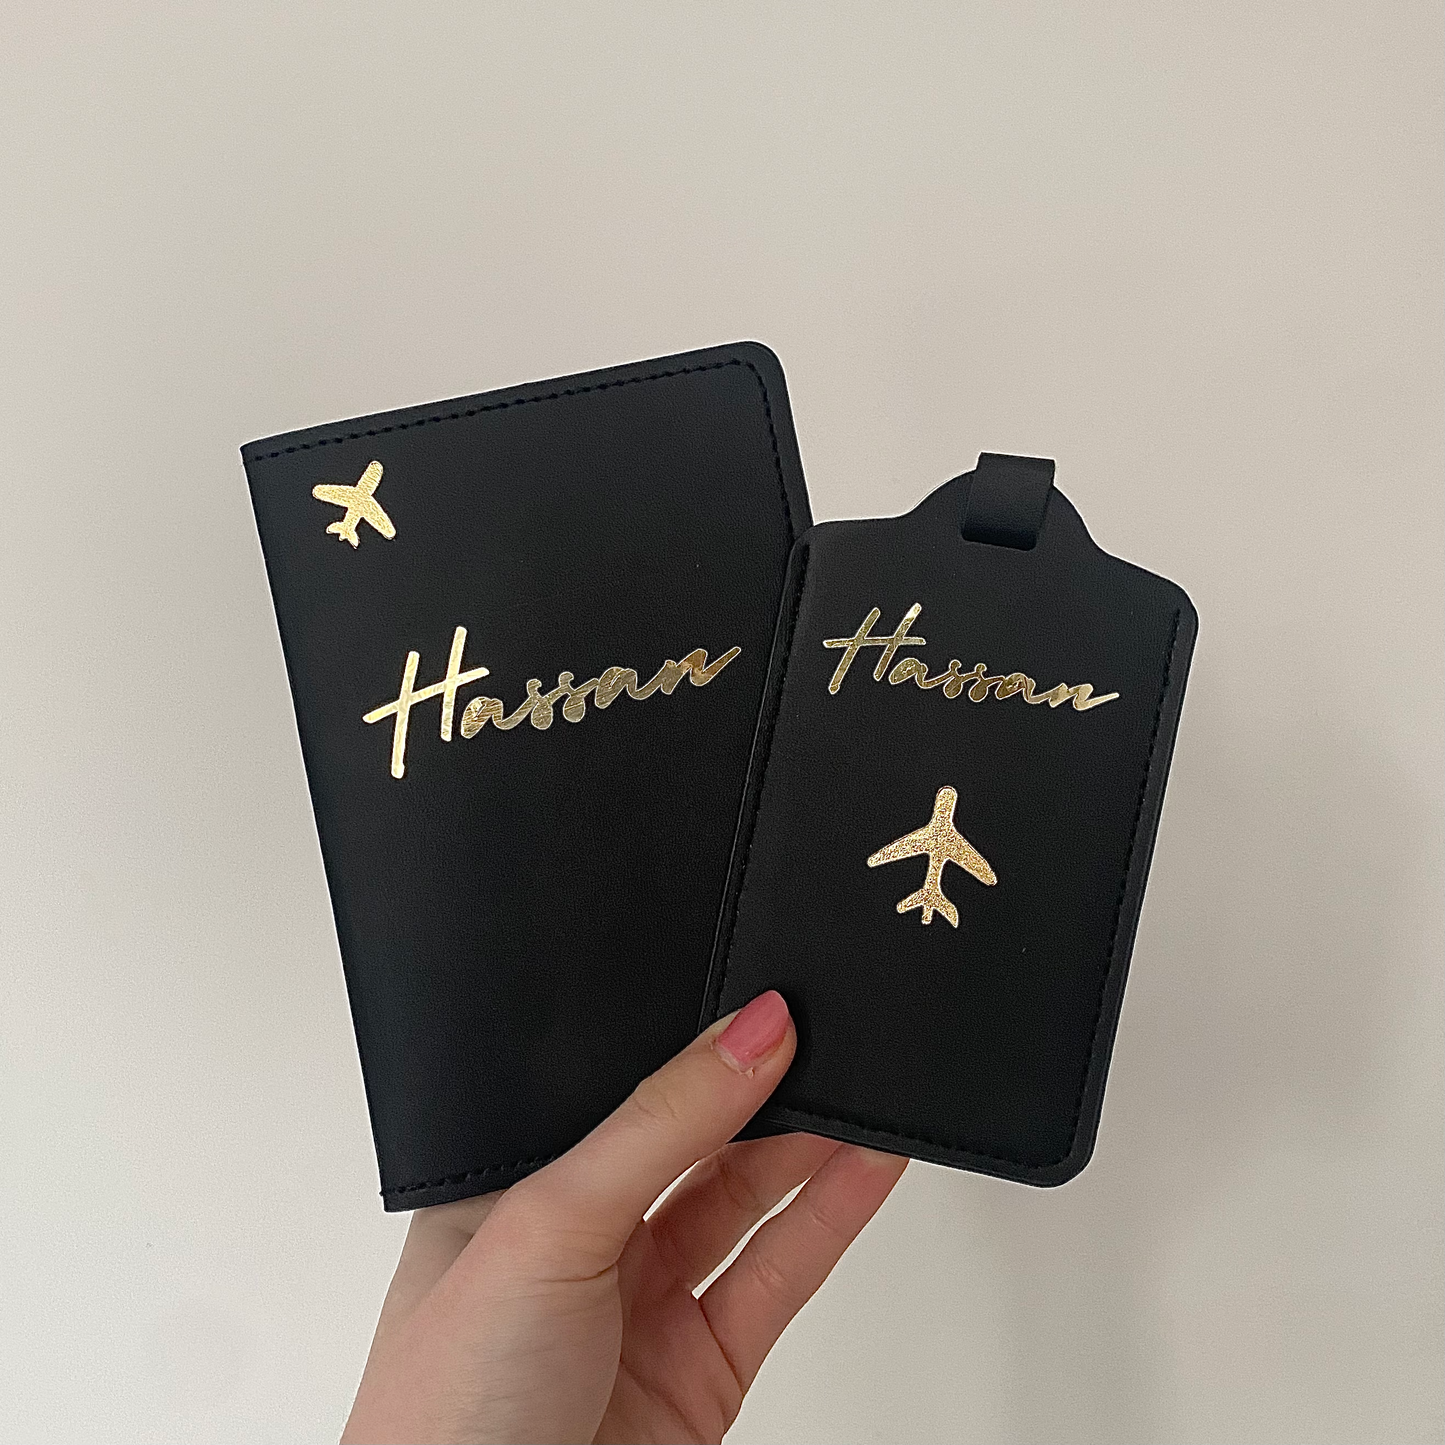 Personalised Travel Passport Cover & Luggage Tags